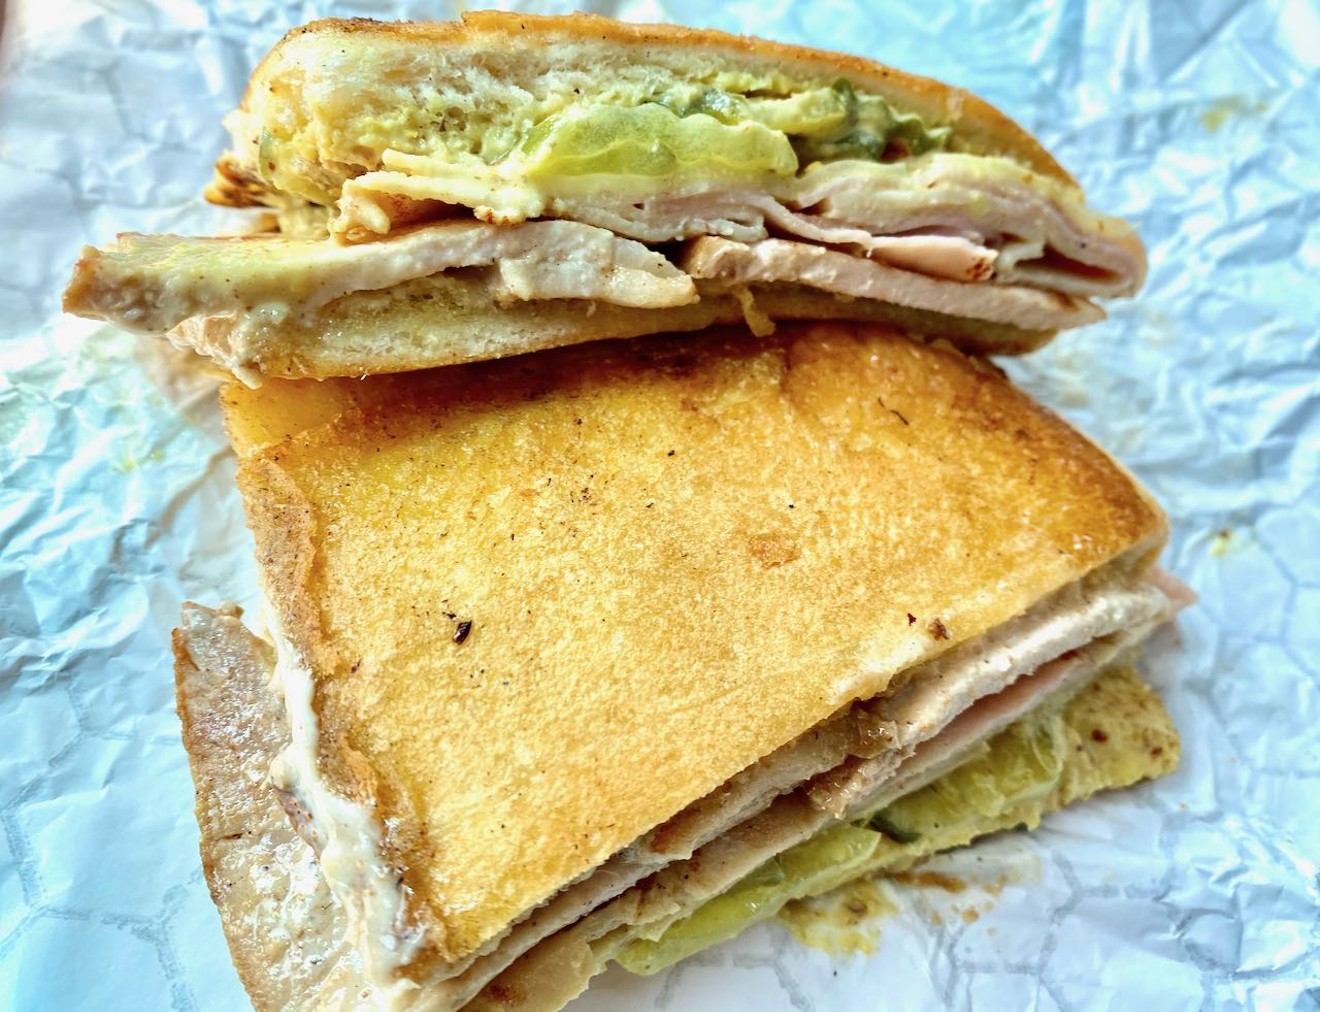 That bread gets a workout trying to contain the Puerto Rican Tripleta at Colossal Sandwich Shop.